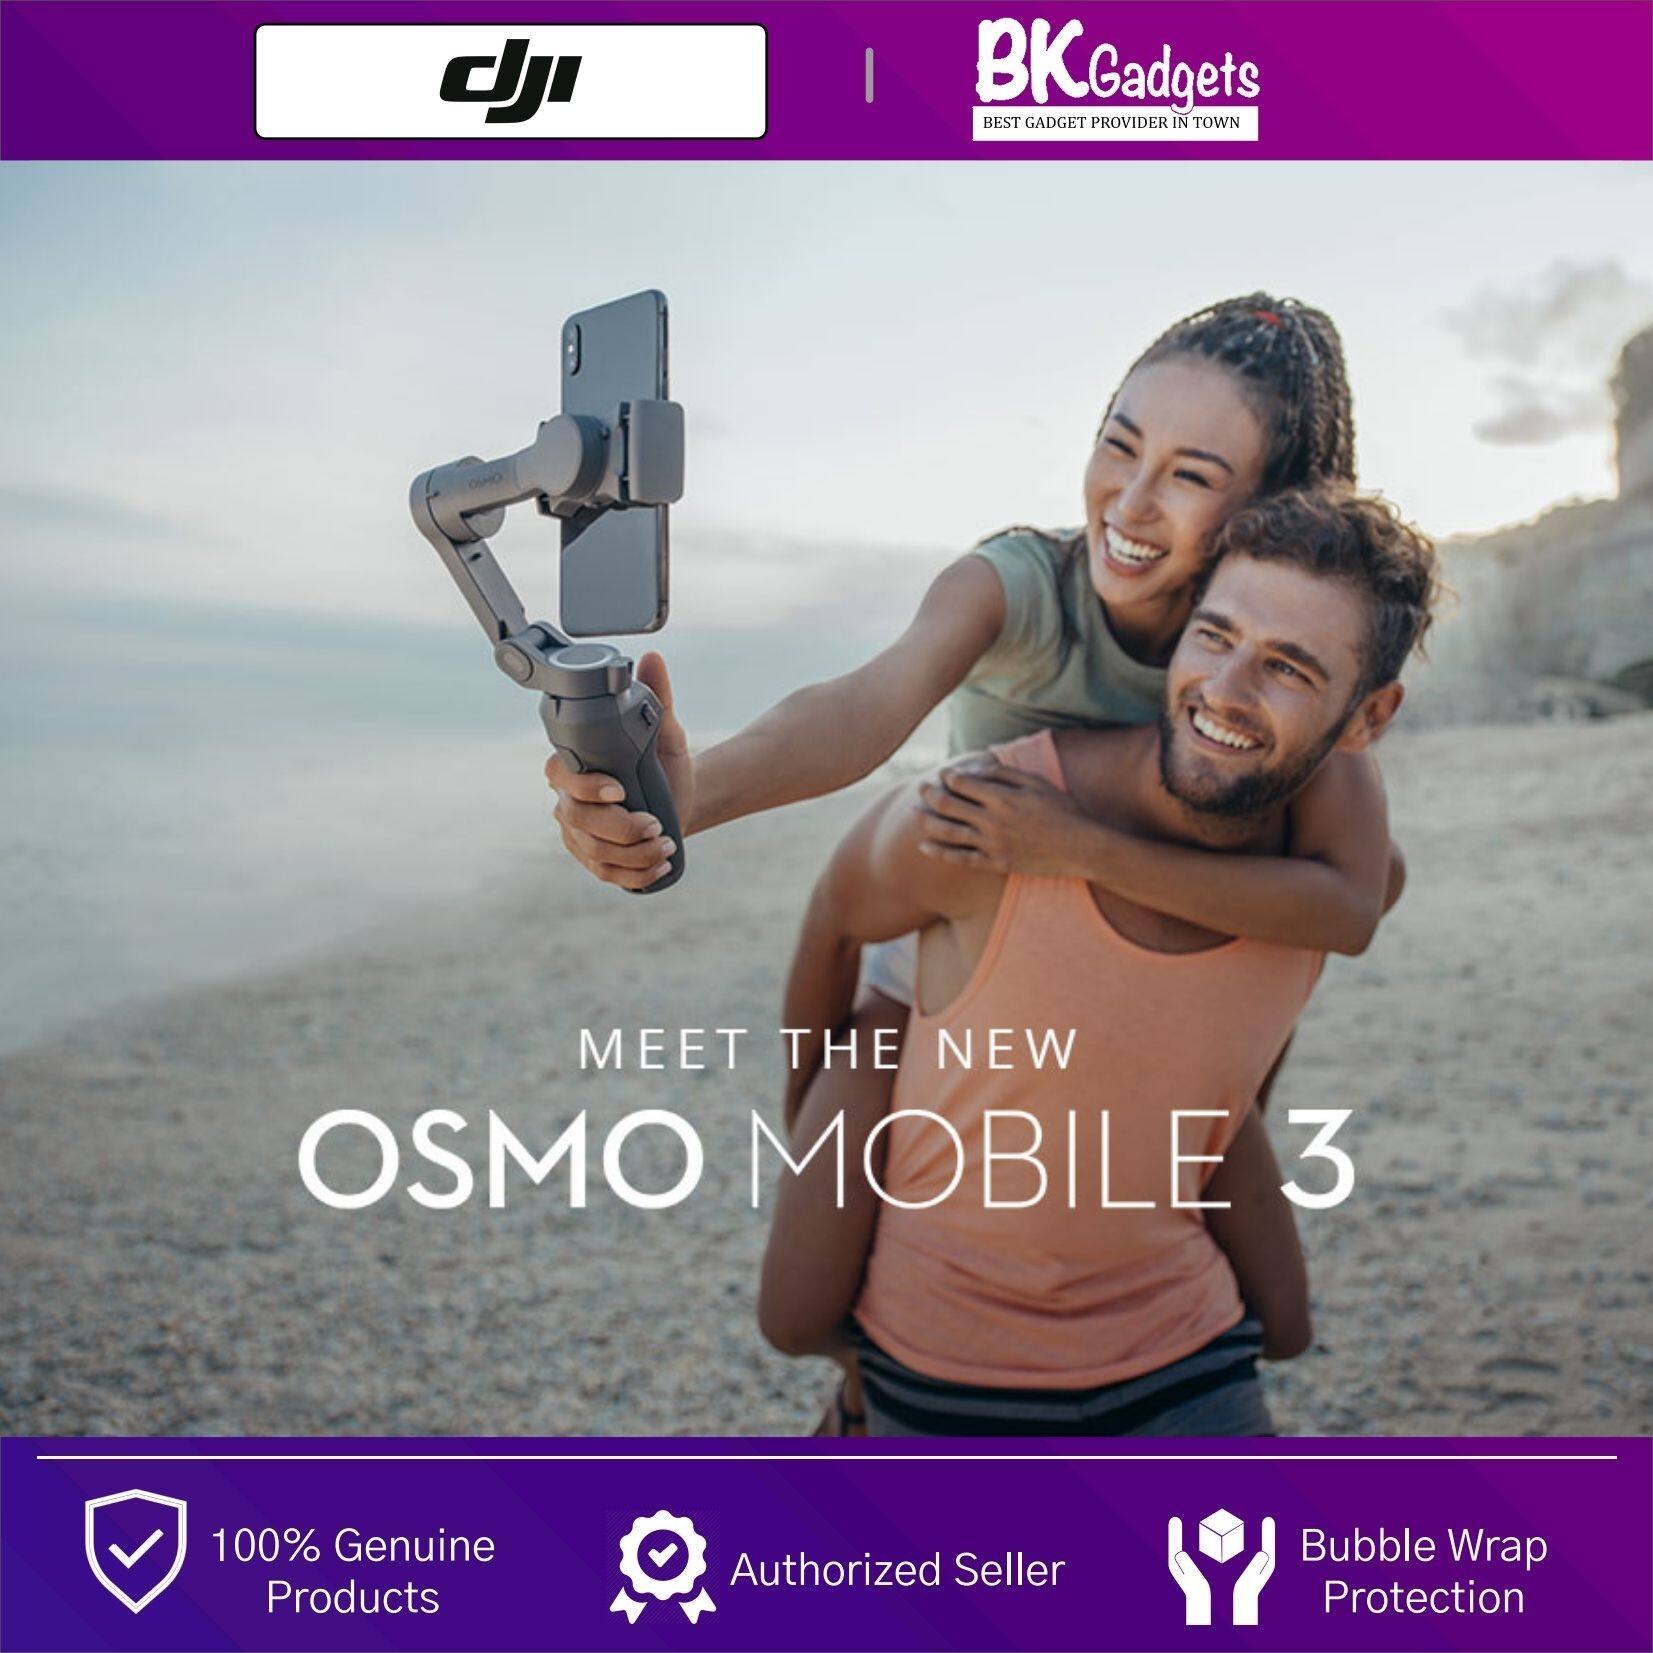 DJI Osmo Mobile 3 - Foldable and Portable | Gesture Control | Active Track 3.0 | Quick Roll